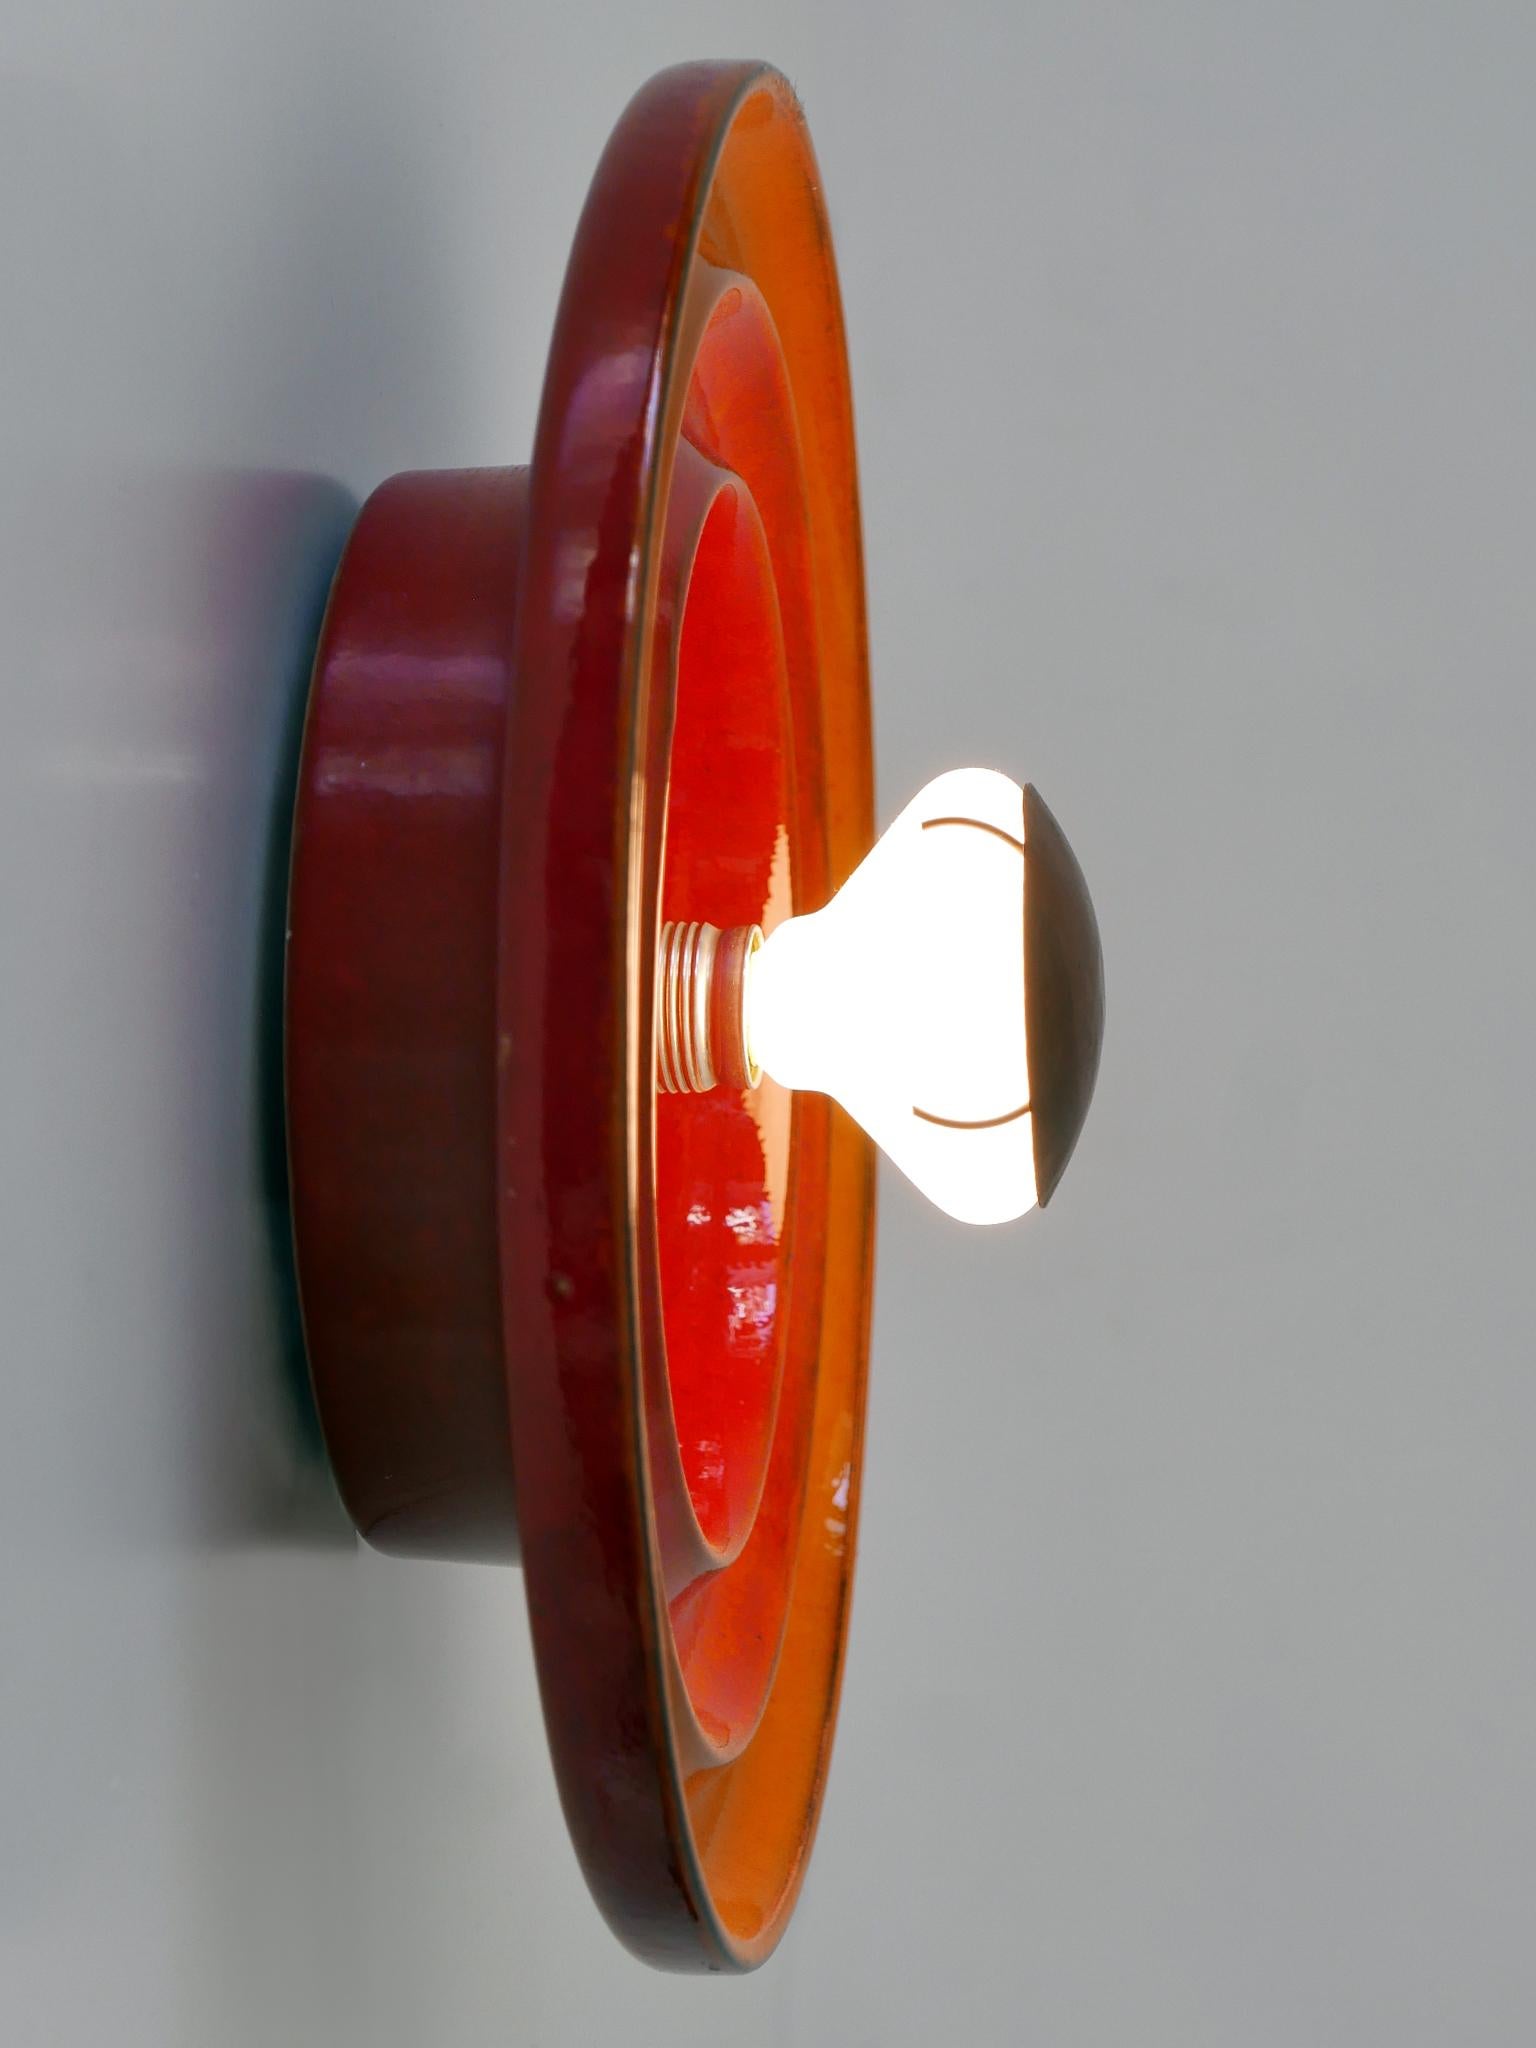 Highly Decorative Mid Century Modern Ceramic Sconce or Wall Light Germany 1960s For Sale 2